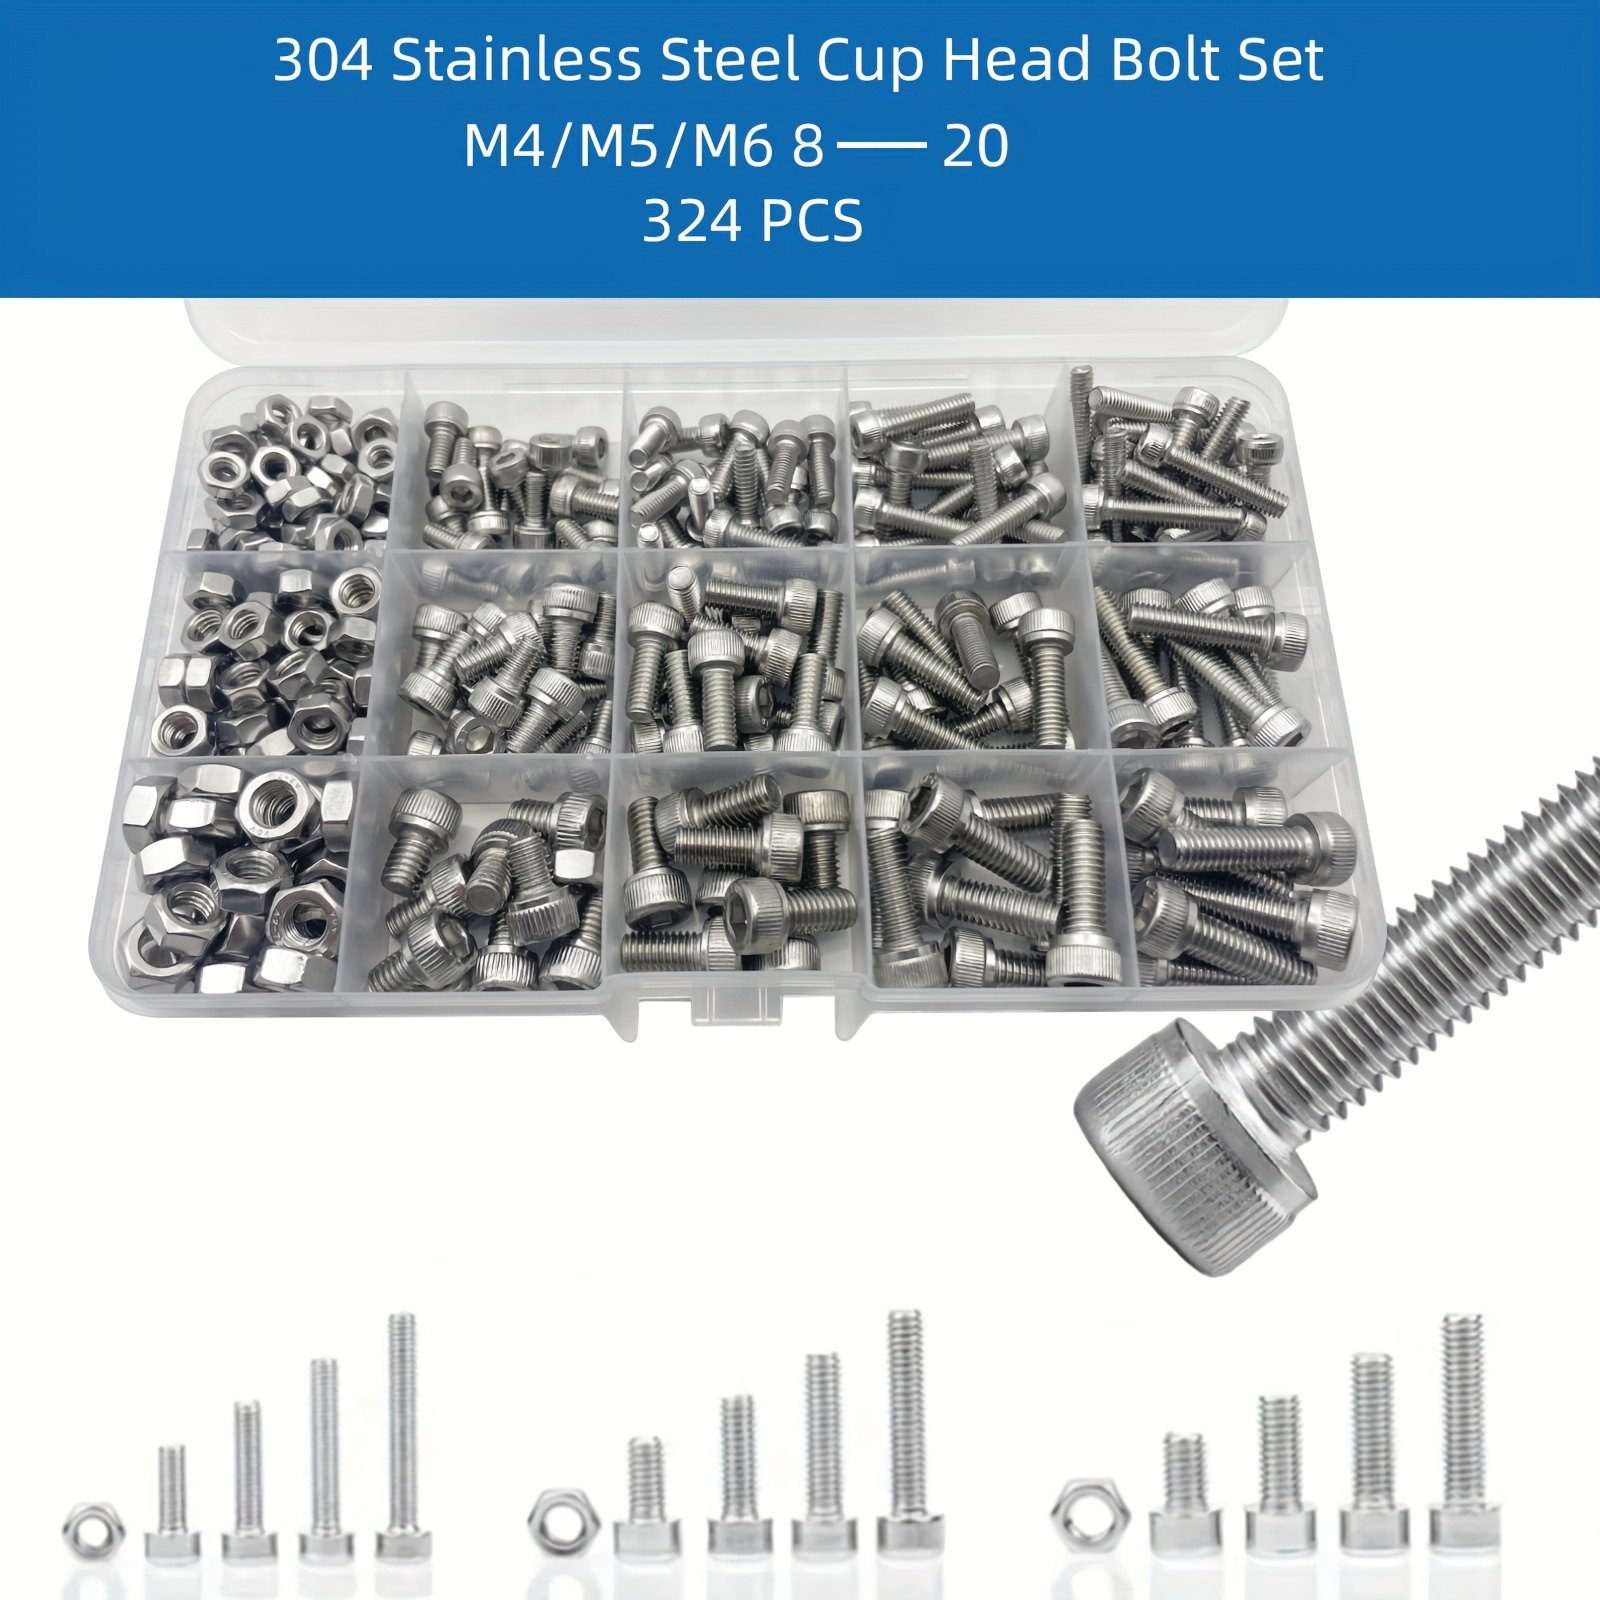 

324pcs M4 M5 M6 Screw Set Stainless Steel Screws And Nuts, 304 Stainless Steel Hexagon Socket Bolt Nut Combination Set, Metric Hexagon Drive, Full Thread